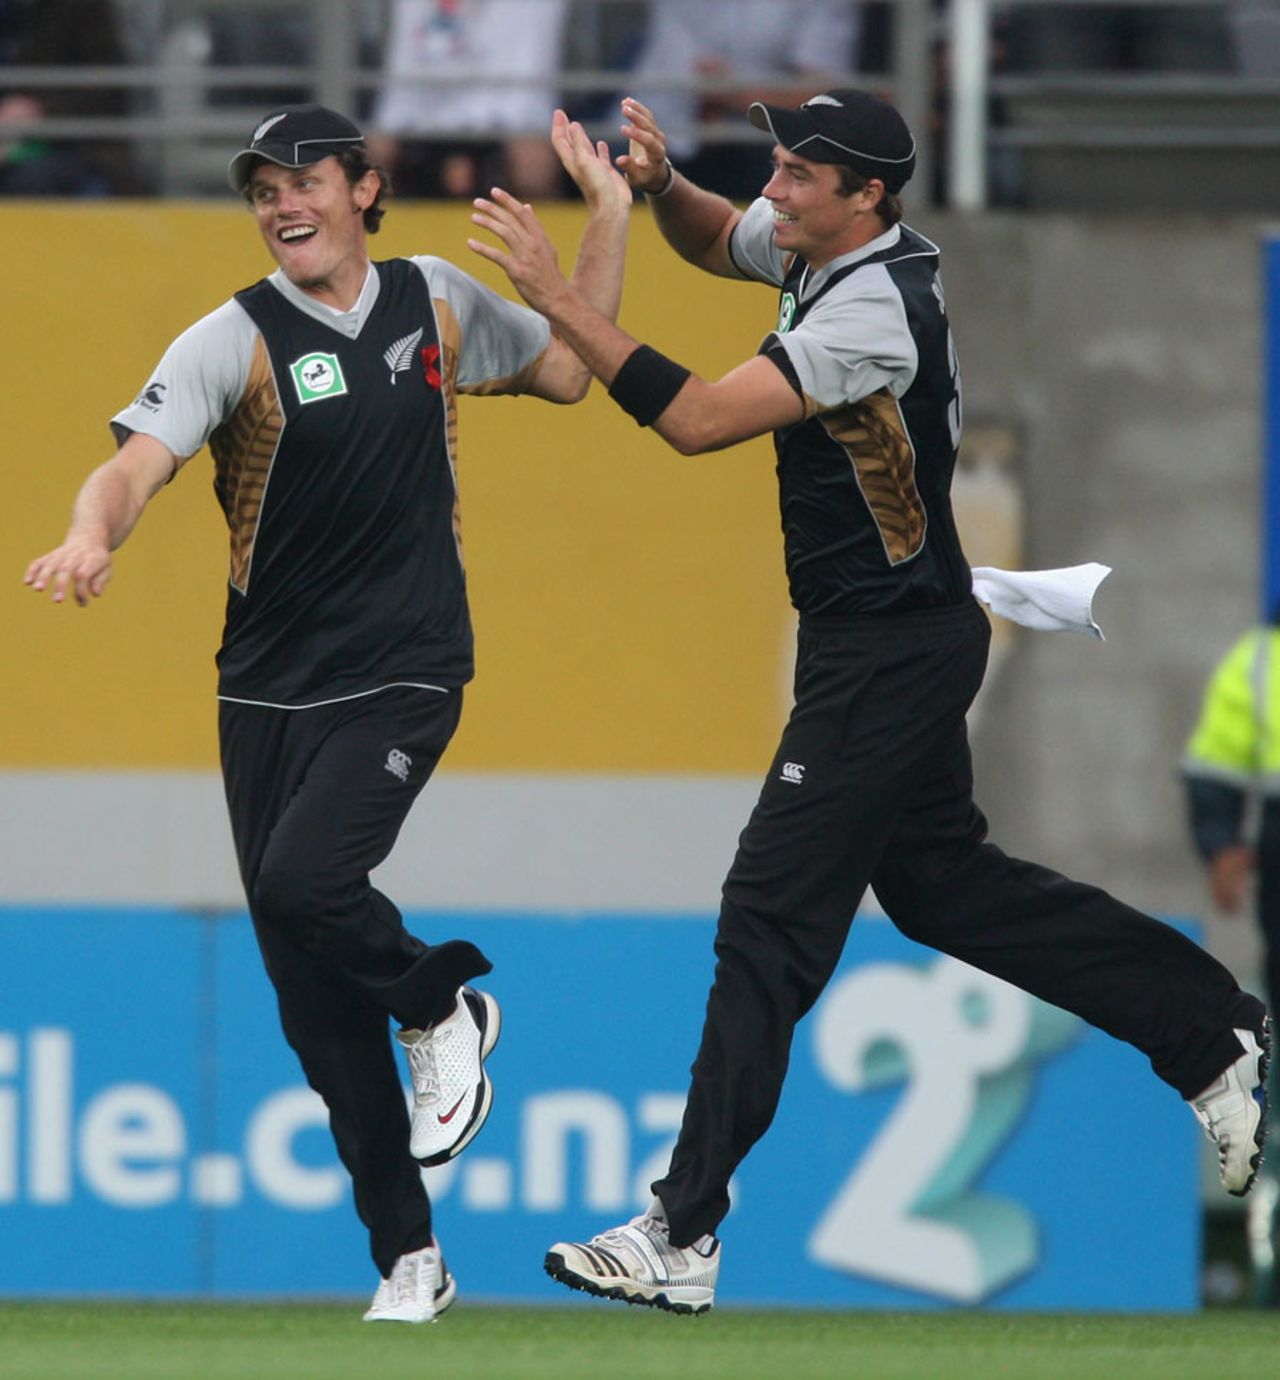 Rob Nicol and Tim Southee took two wickets apiece, New Zealand v South Africa, 3rd Twenty20, Auckland, February 22, 2012